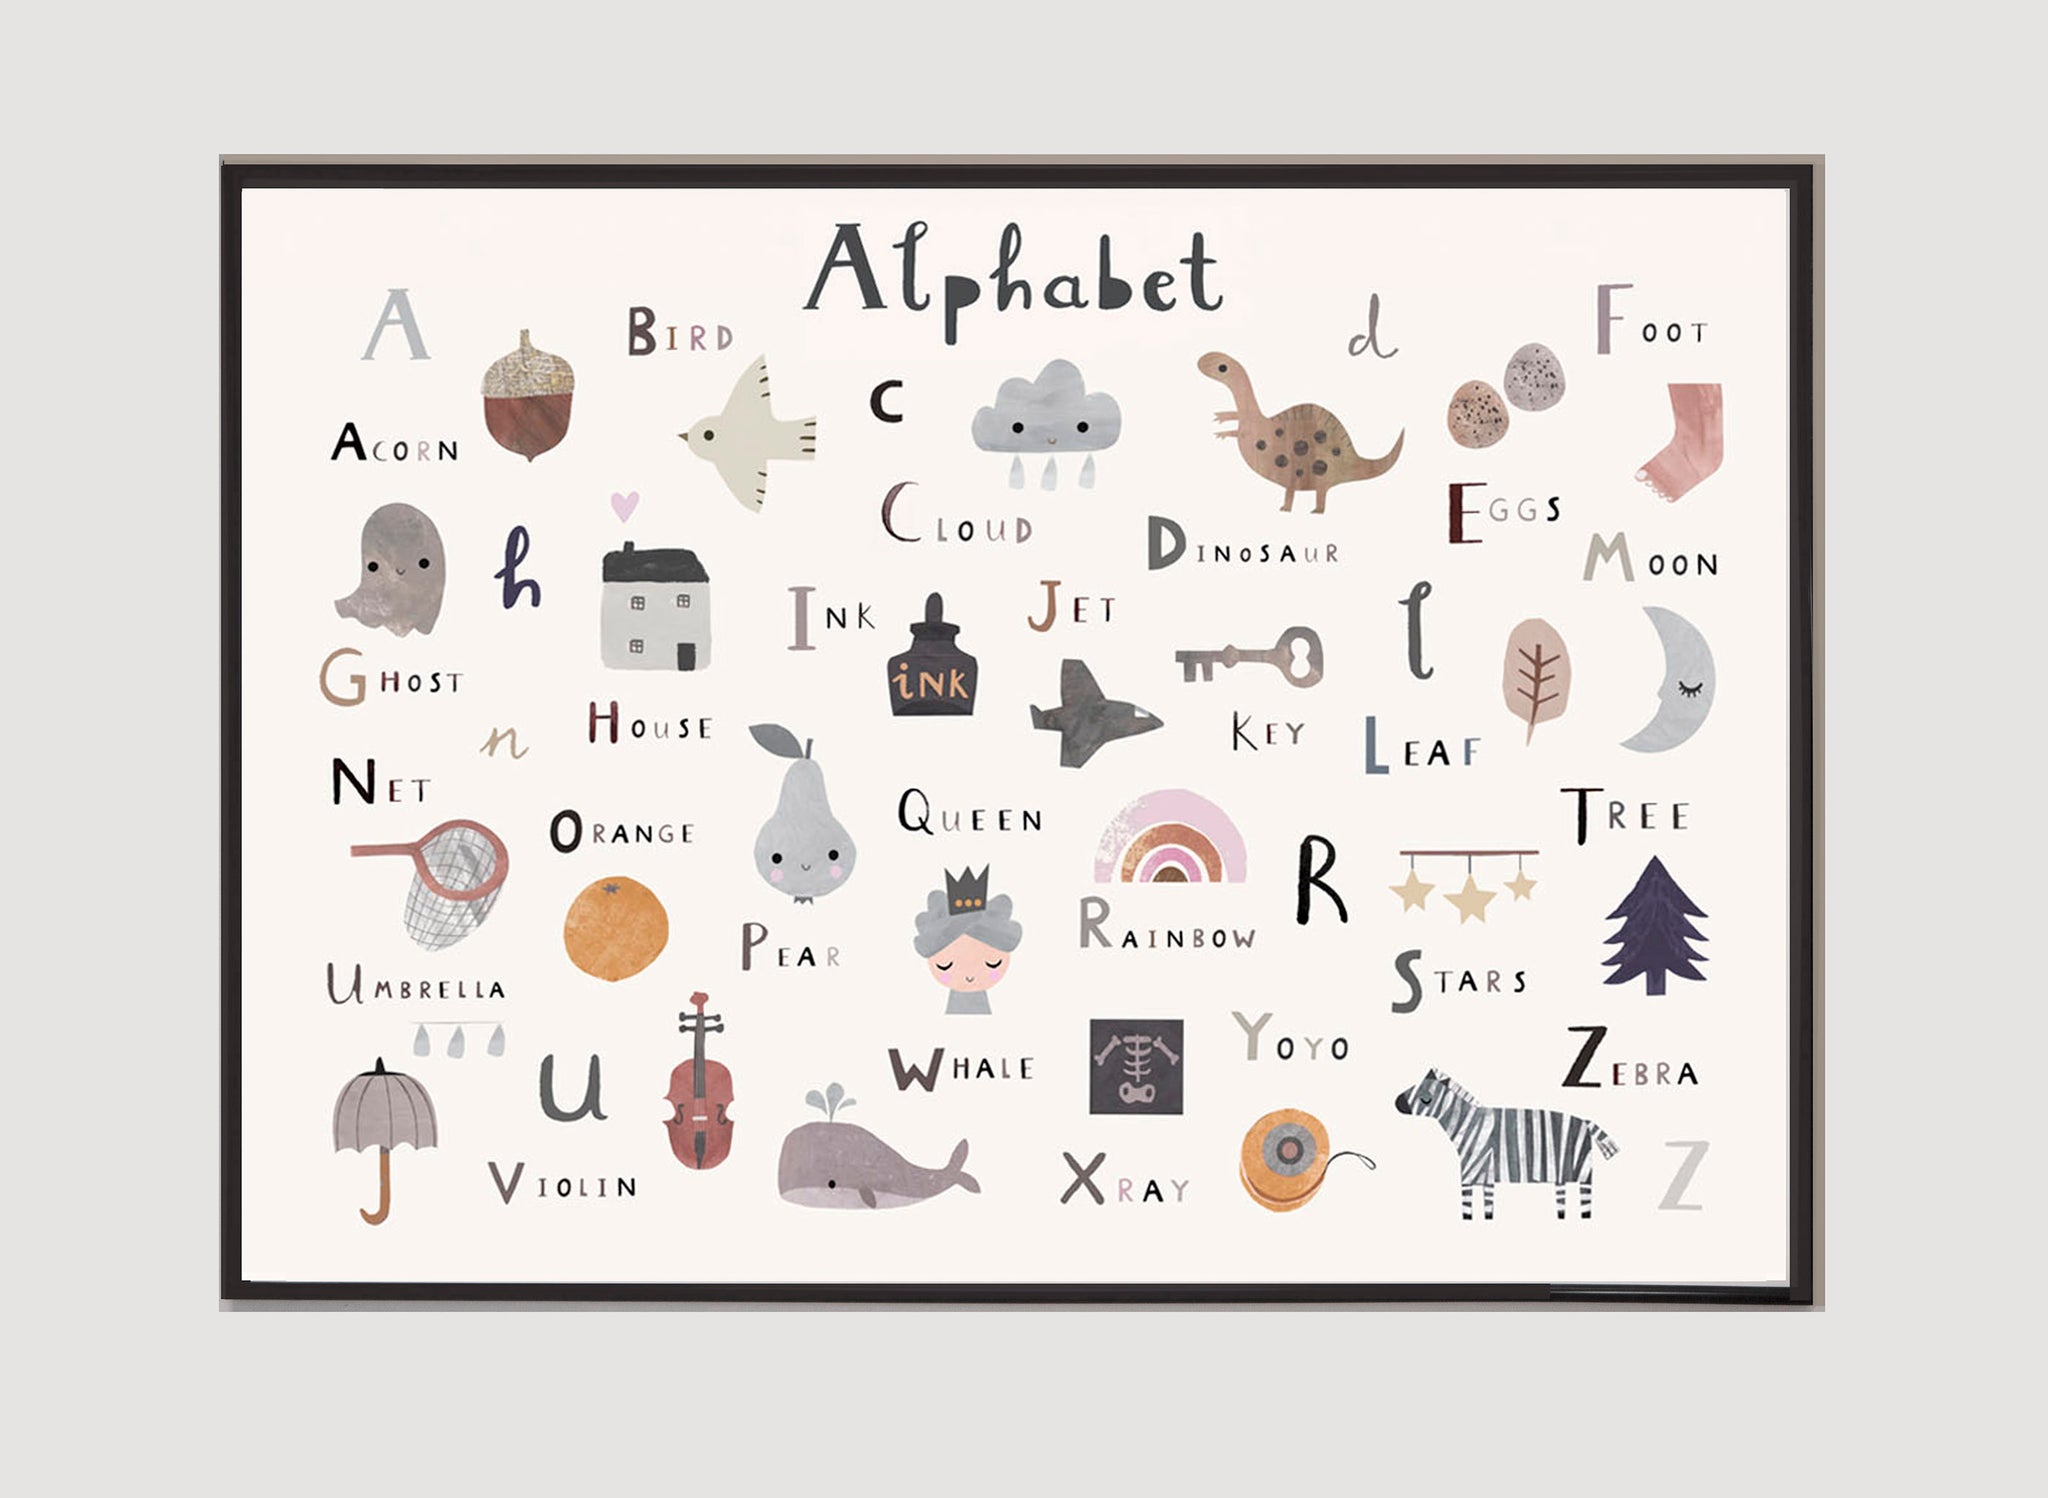 How to take care of a alphabet lore letter (no scrolling)